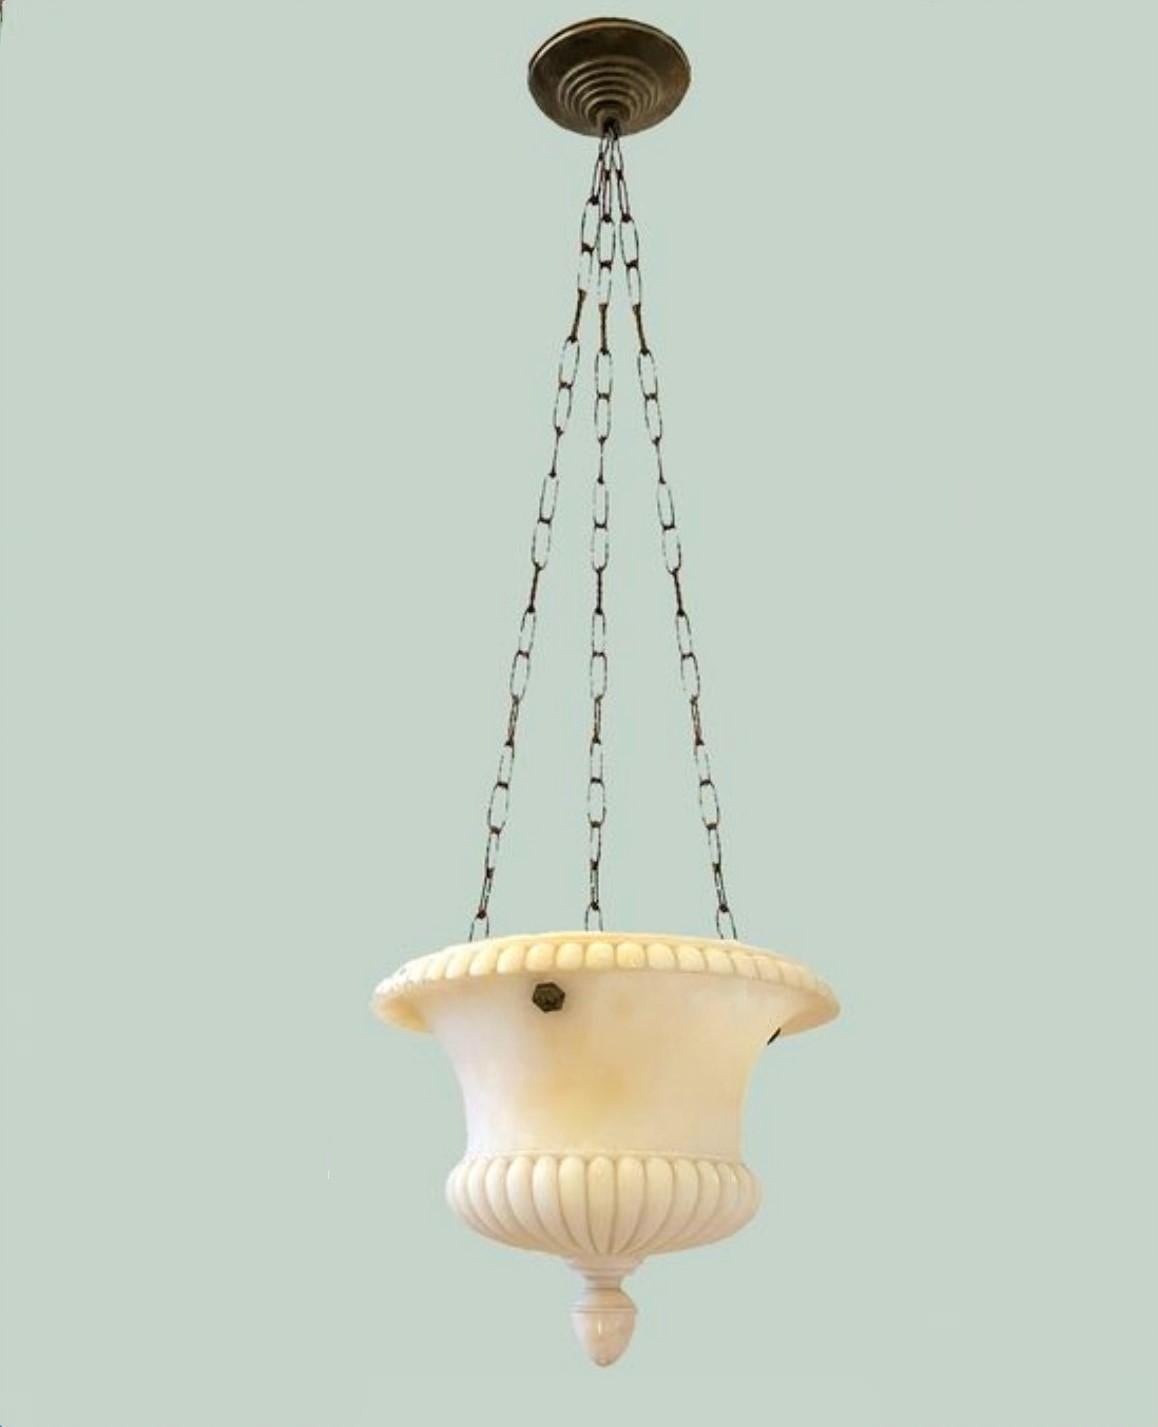 A very elegant hand-carved white alabaster neoclassical style pendant lantern manufactured in Italy in the late 19th century.
The dome is shaped like an antique Greek Crater perfectly balanced by the bronze patinated chains connecting to a canopy,